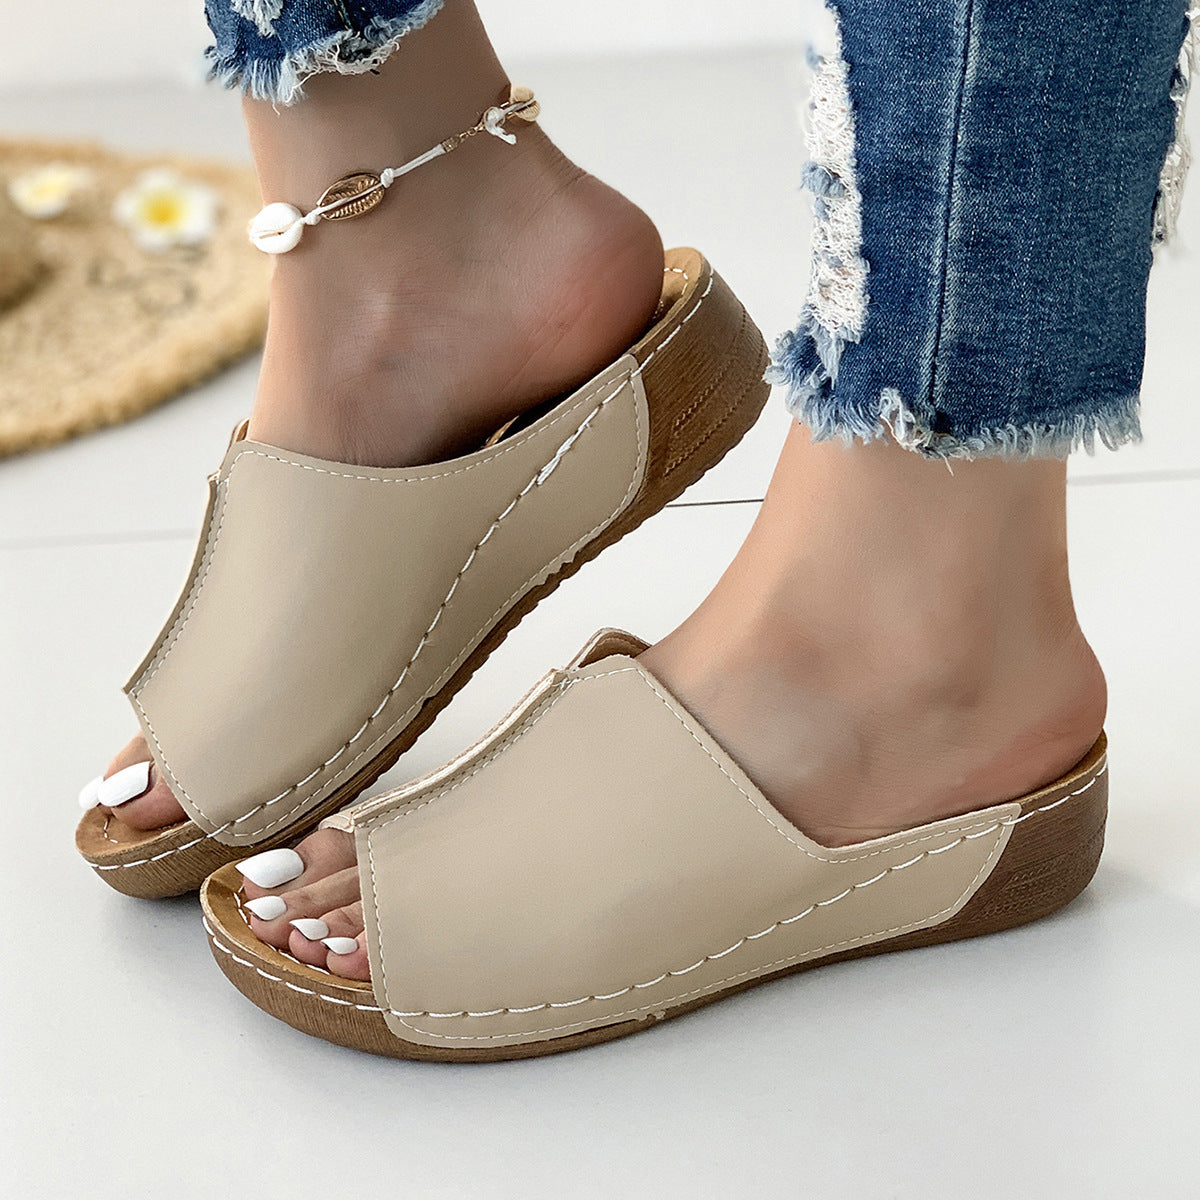 Summer Wedge Women's Slippers Plus Size Casual Fashion Simple Platform